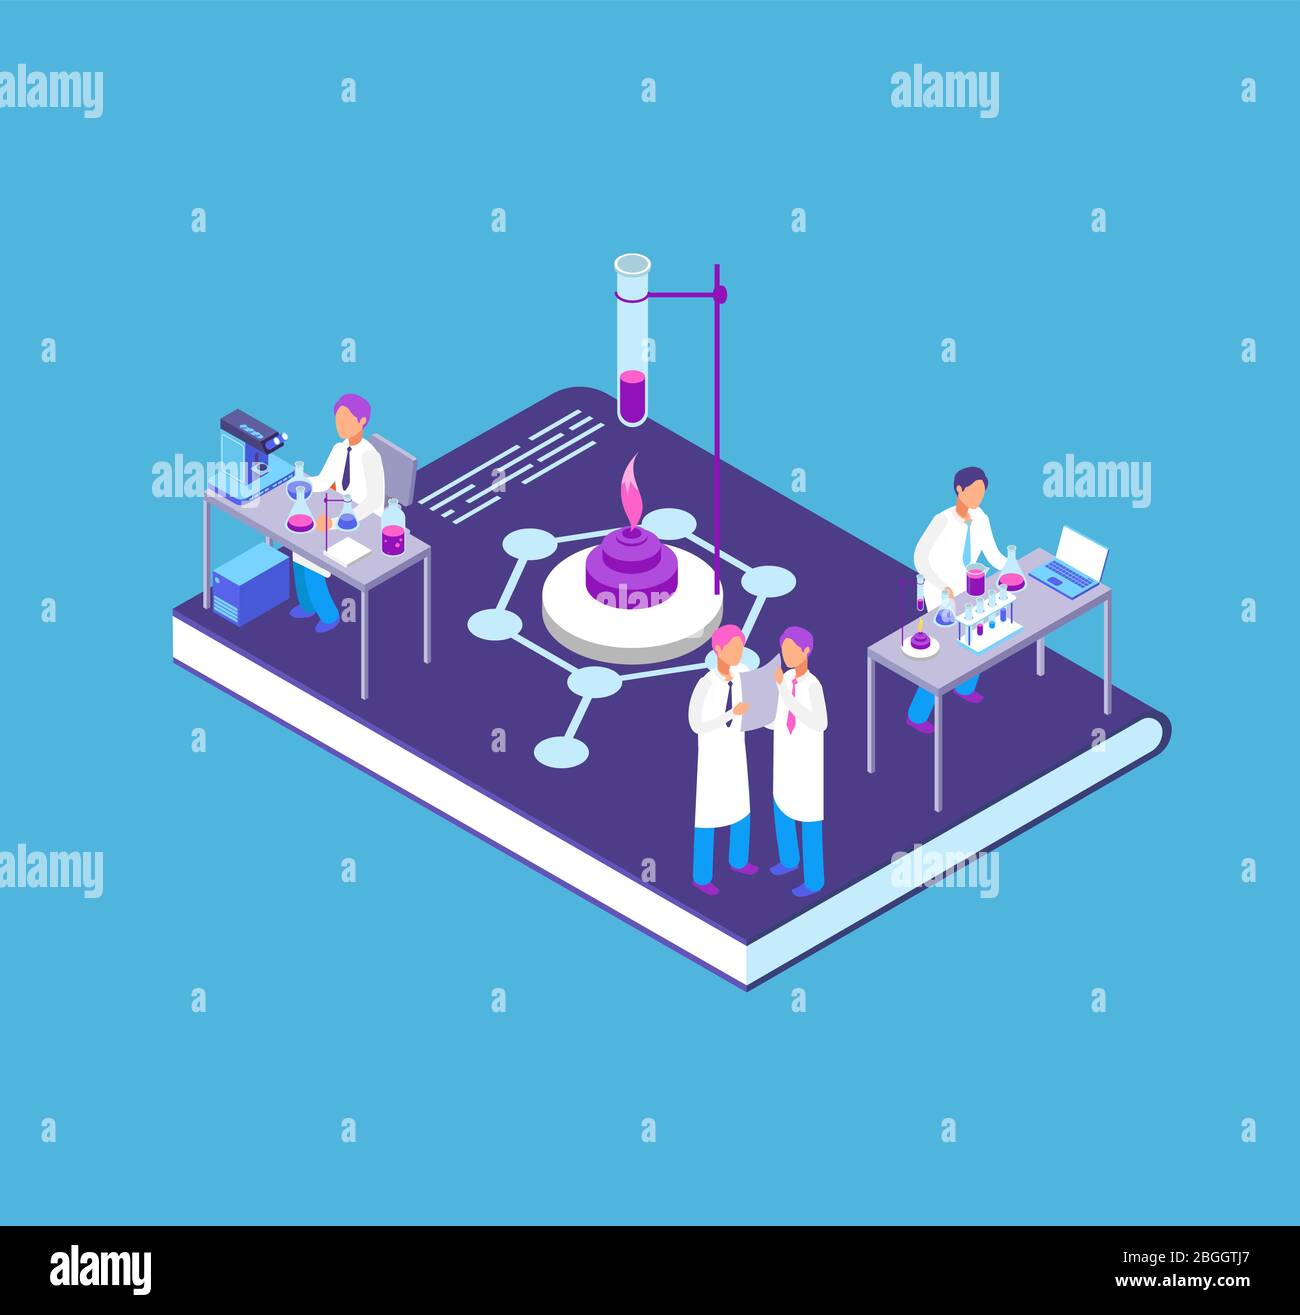 Chemistry, pharmaceutical 3d isometric concept with chemical laboratory equipment and people research scientist vector illustration. Chemical science research, laboratory experiment Stock Vector